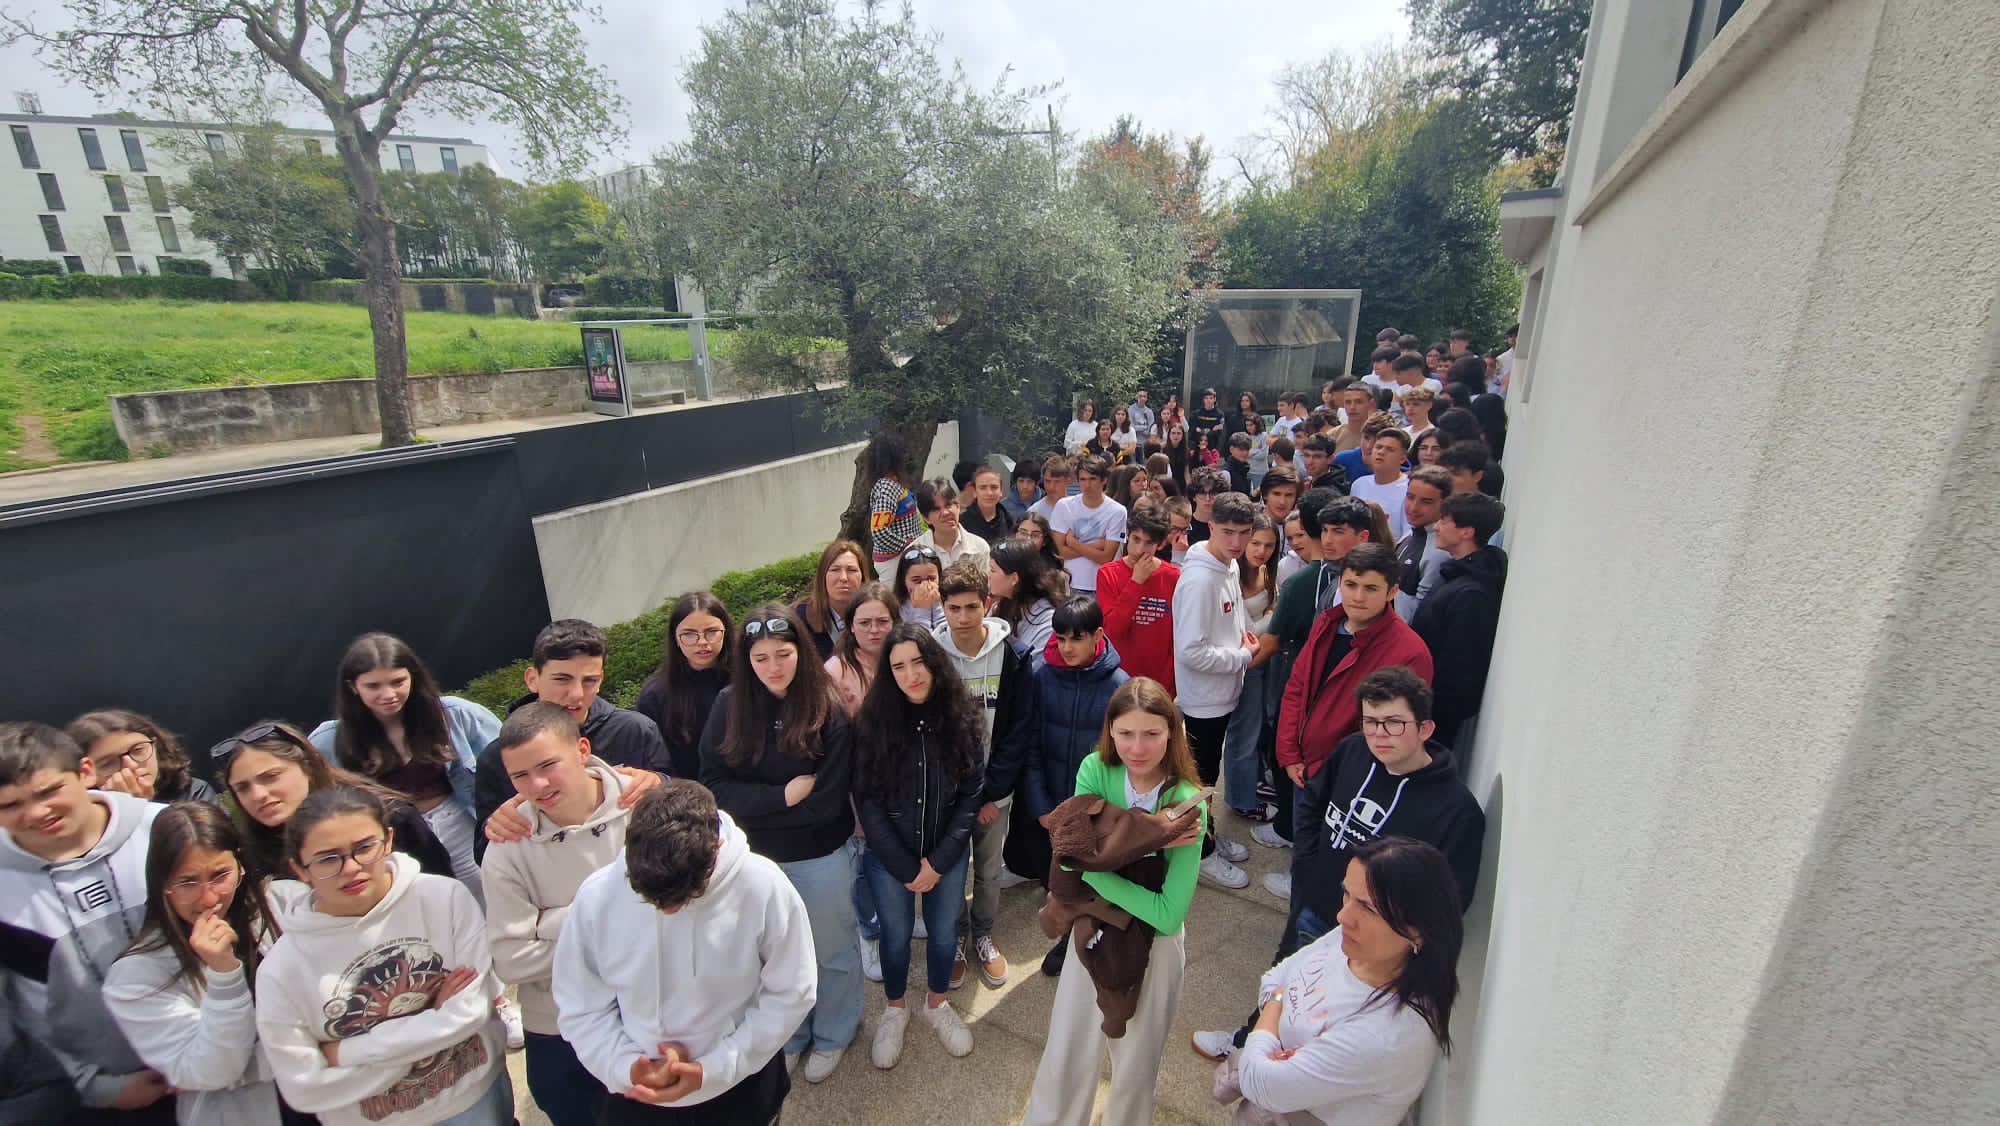 The Jewish Museum of Oporto welcomed 500 teenagers on the National Day of Remembrance of the Victims of the Inquisition